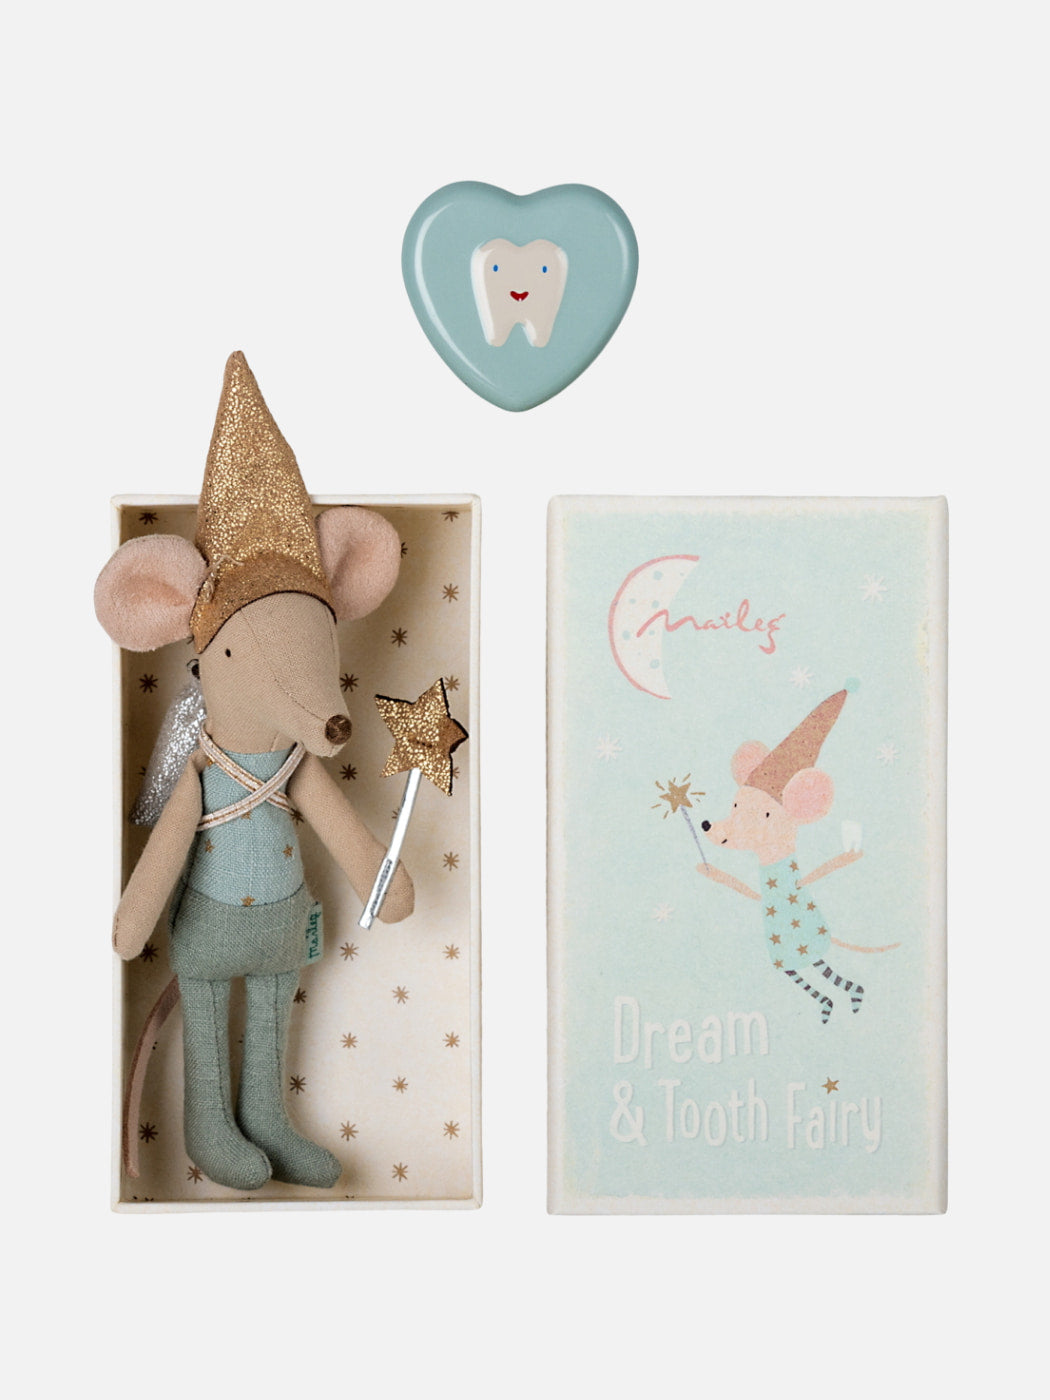 Mouse Tooth Fairy in Box - Blue